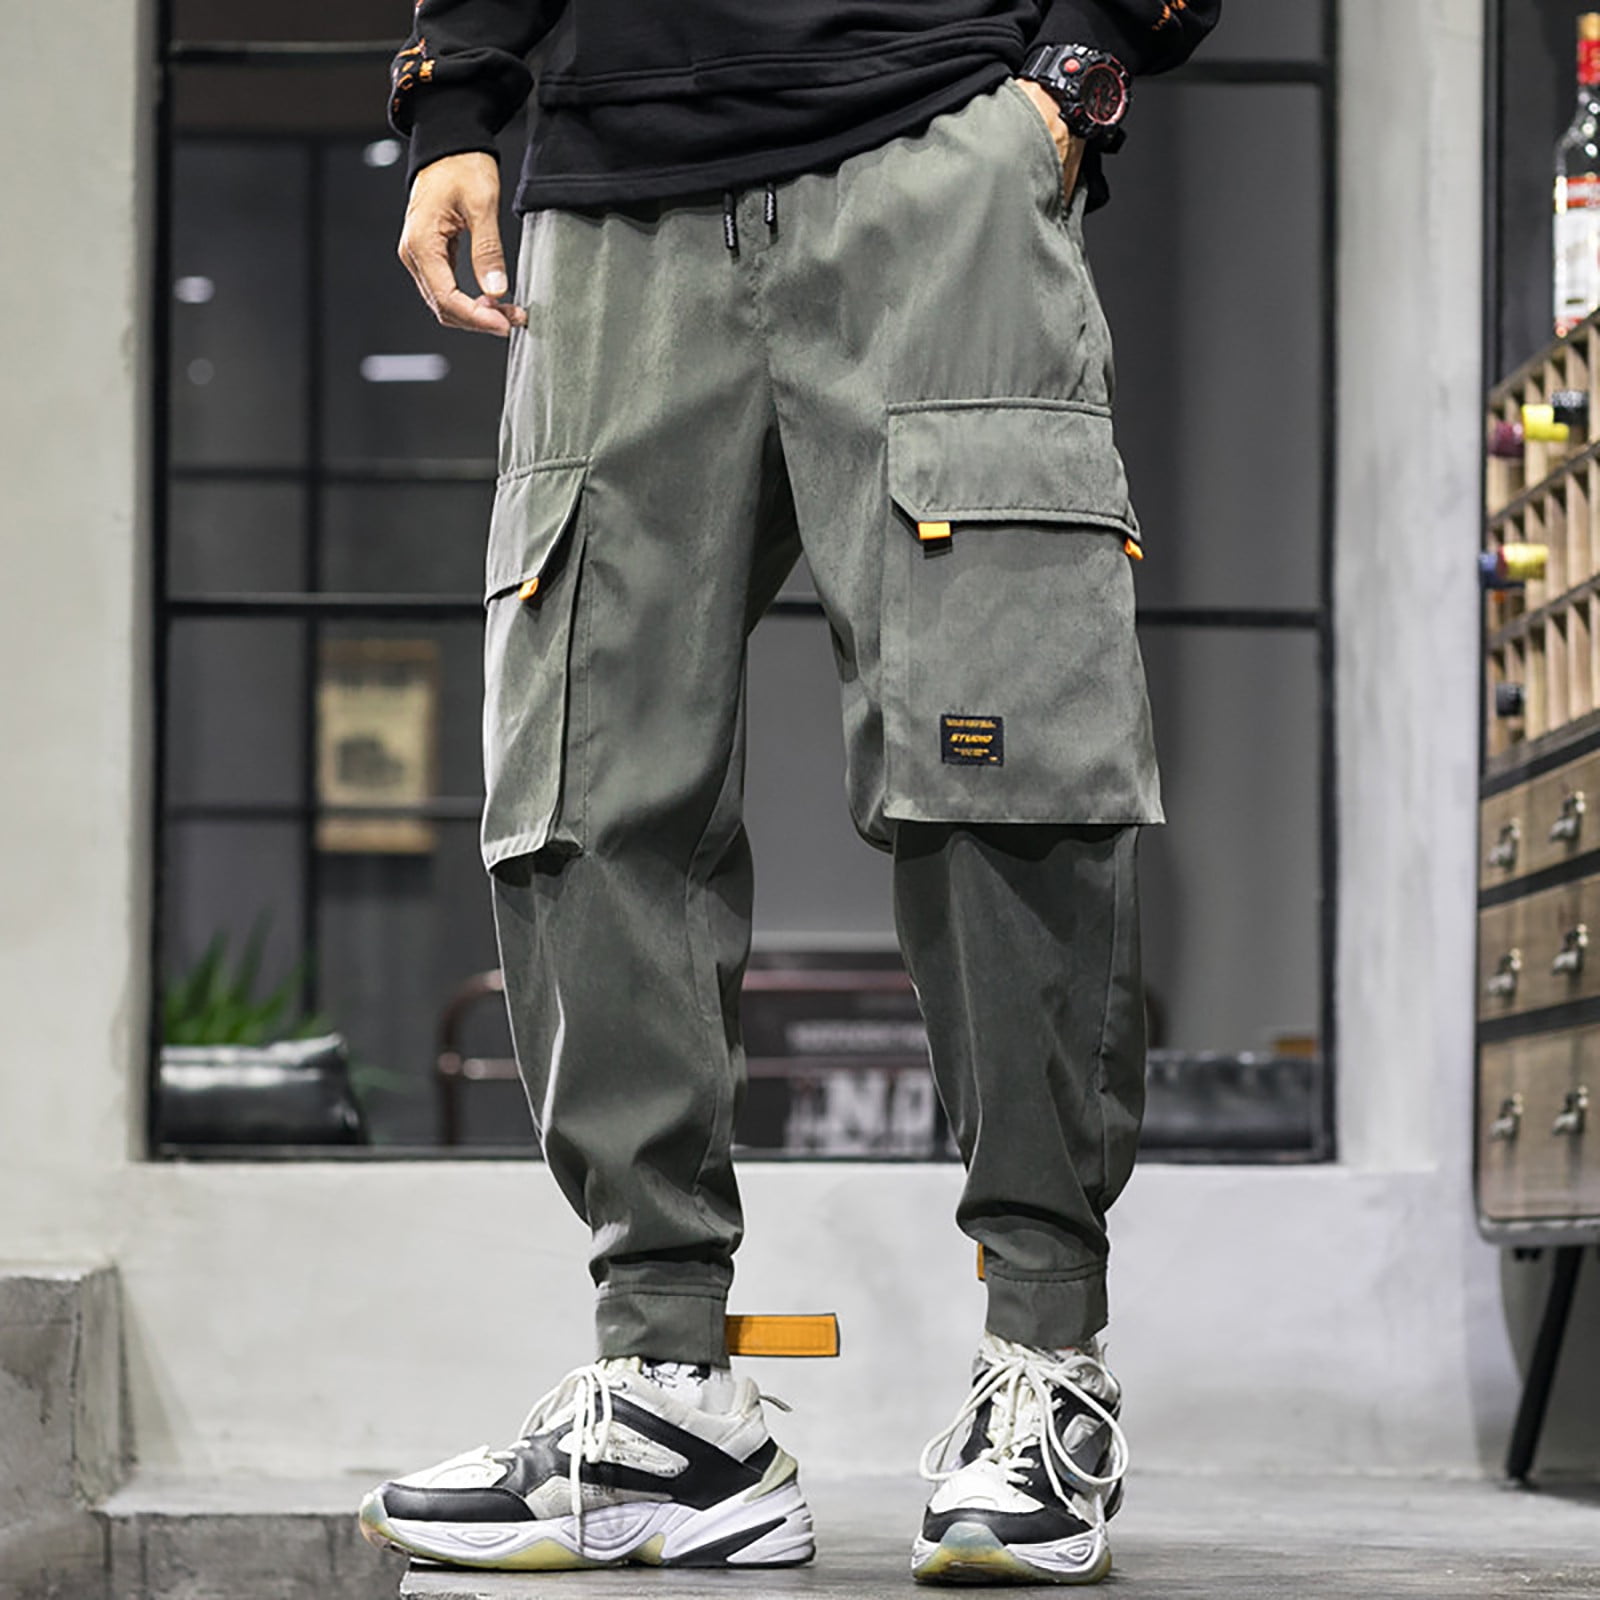  STYESH Mens Jogging Pants Men's Business Casual Pants Wide Leg  Chino Pants Loose Drawstring Waistband Work Pants Solid Dressy Everyday  Pants : Clothing, Shoes & Jewelry